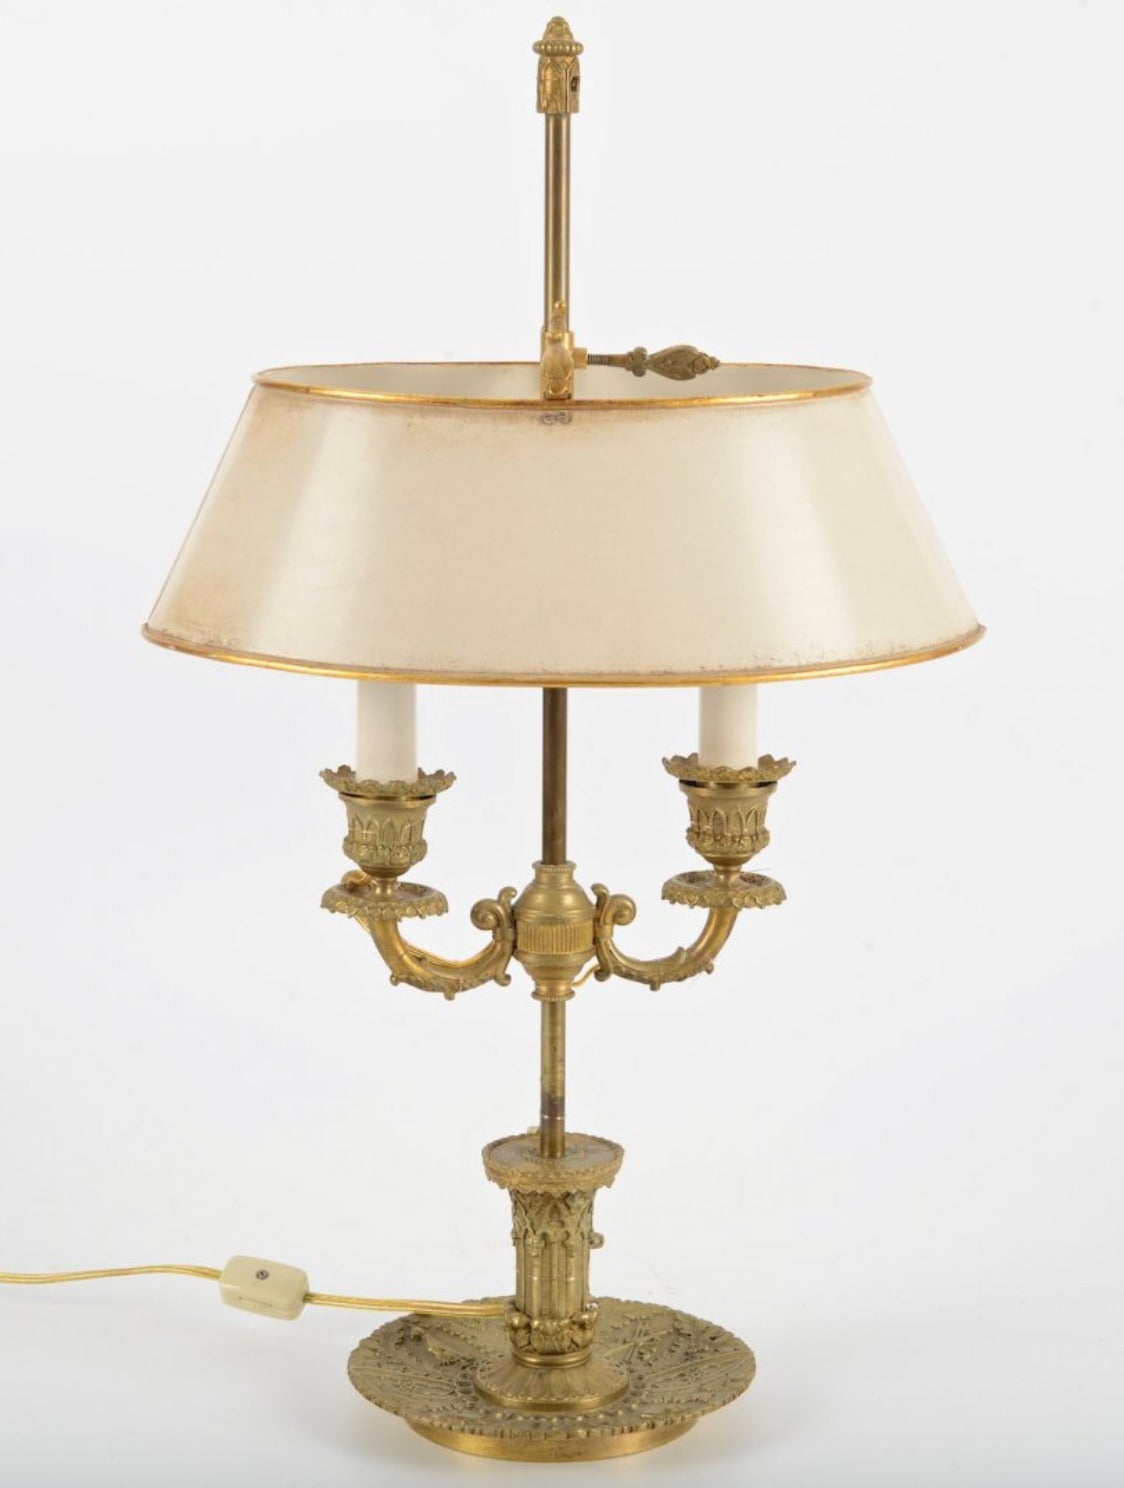 A Fine Pair of French
Gilt Bronze Bouillotte Lamps
19th Century

With white tole shades

Height 21in.  Width 13 in.  Depth 9 in.

Provenance:
Private Collection, New York
Le Trianon Fine Art & Antiques, Sheffield, Ma.

Lamp64
